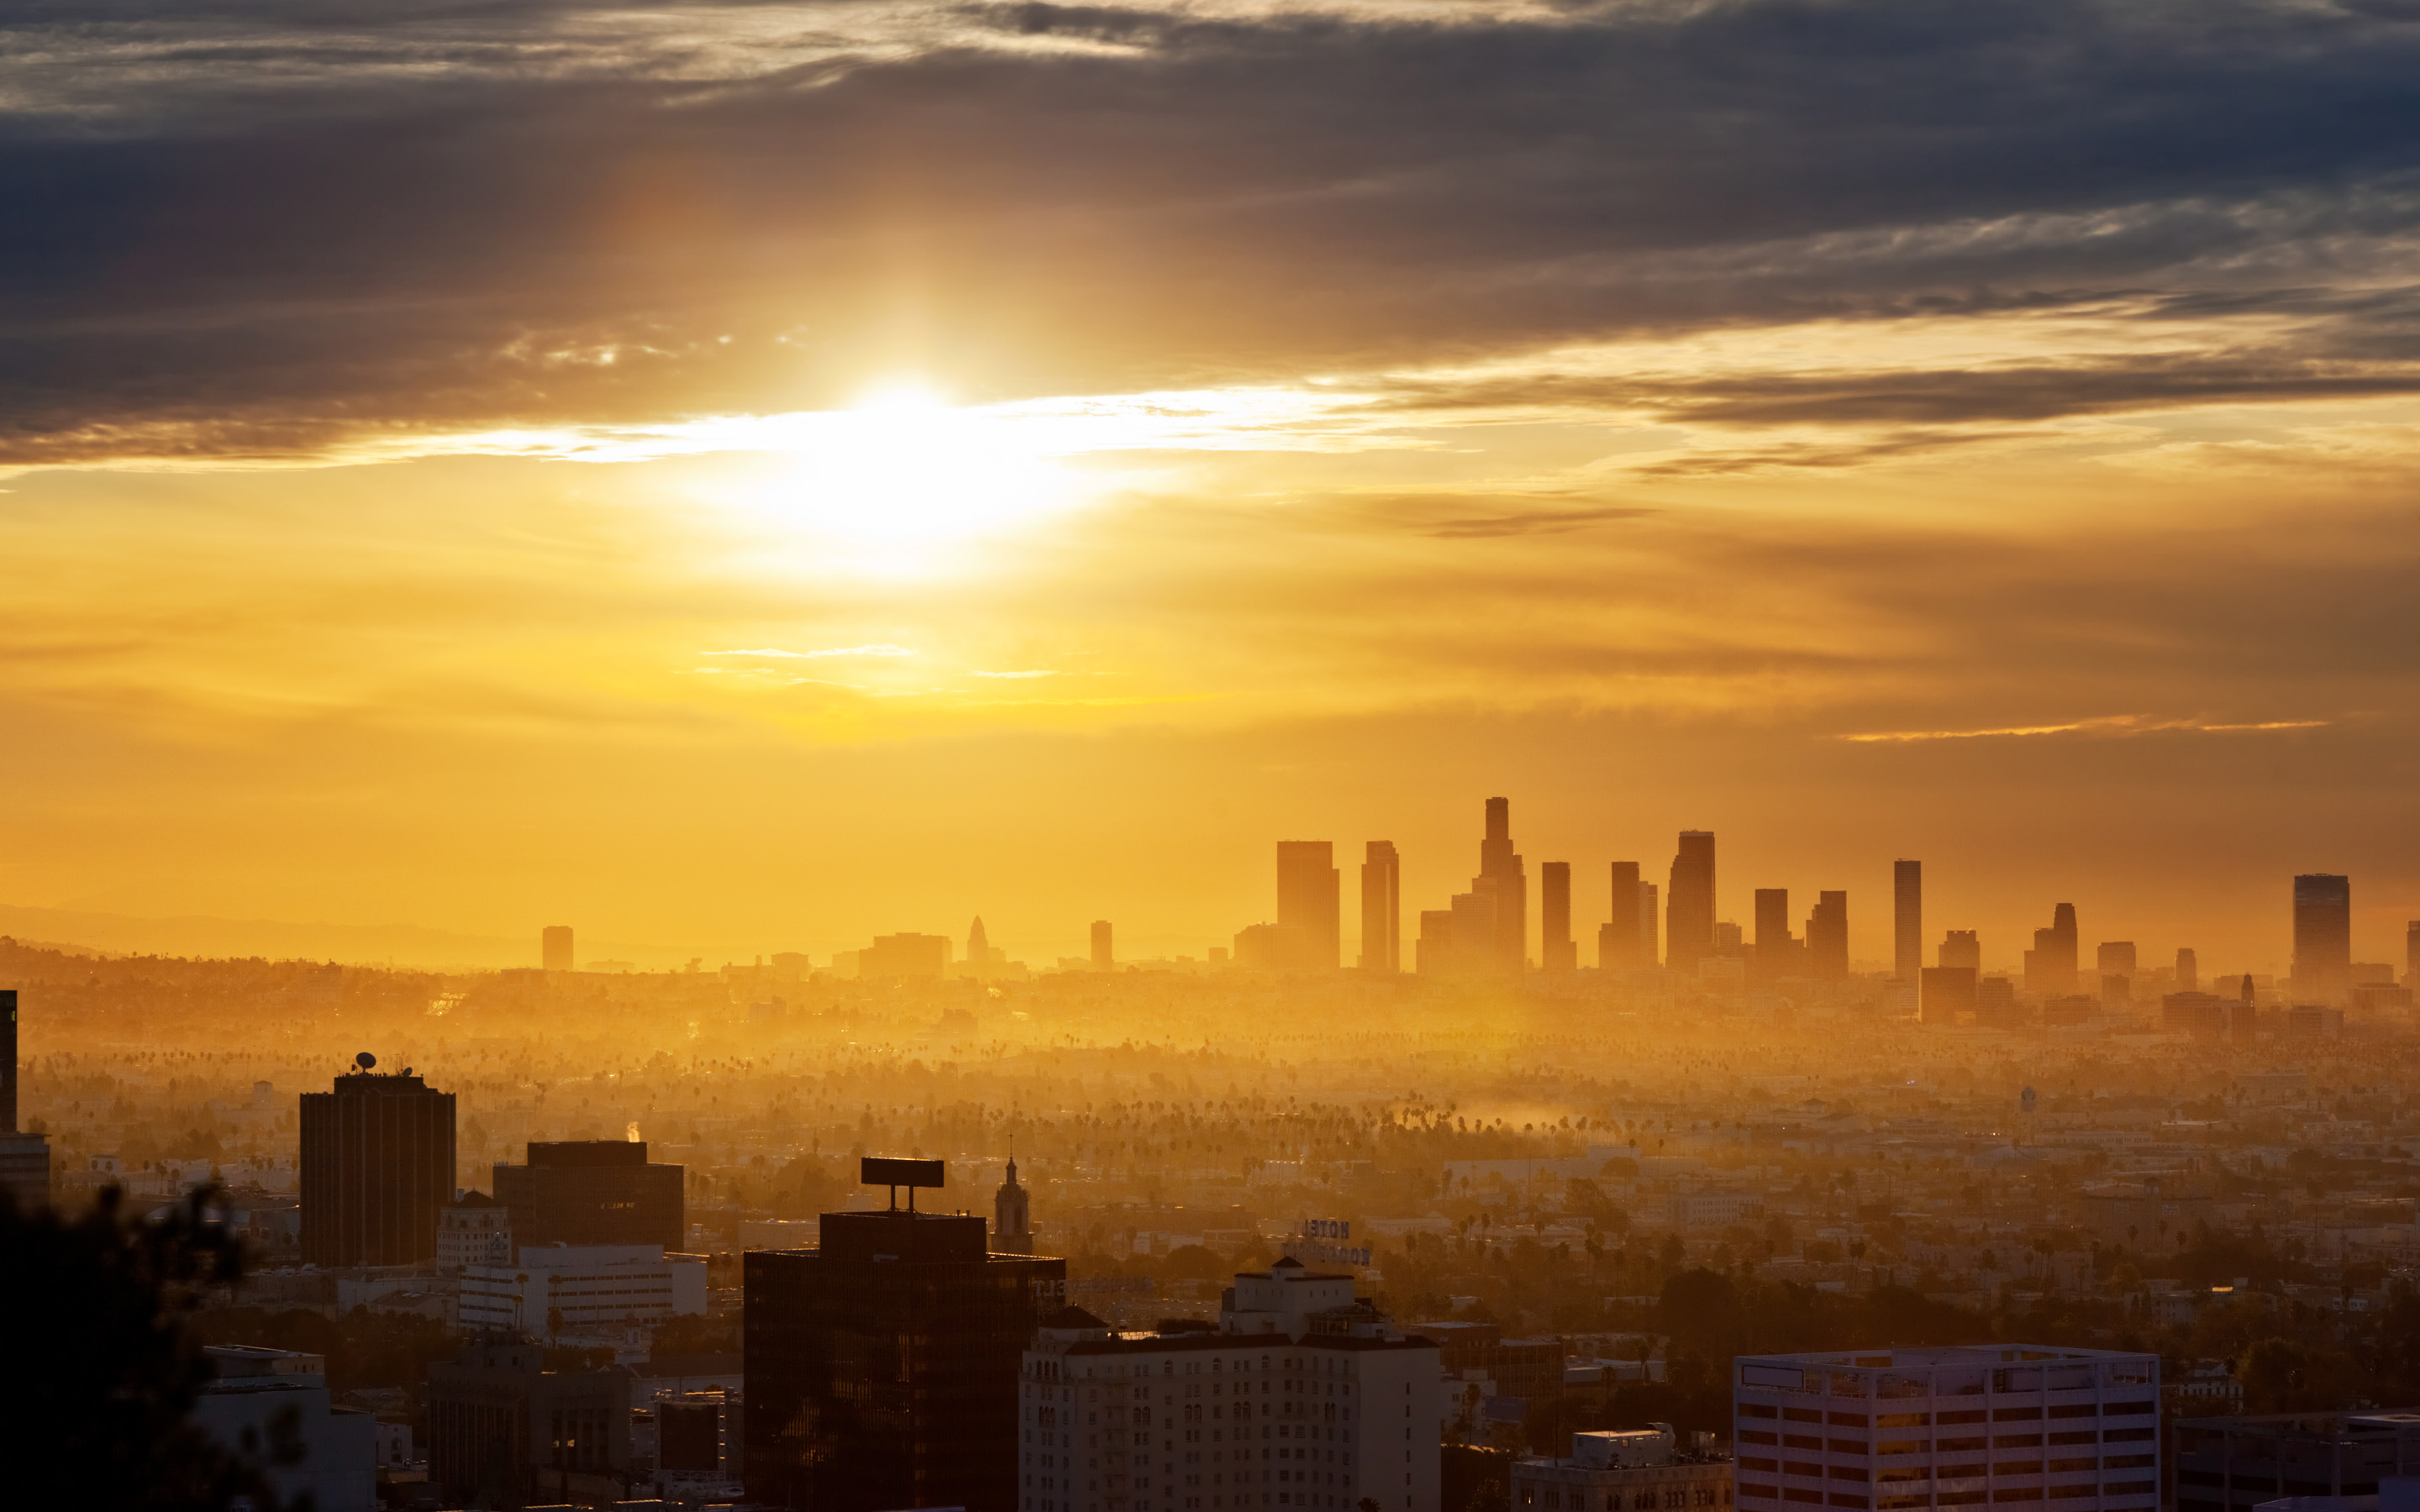 HD Wallpaper Los Angeles Available In Different Size Ranging From